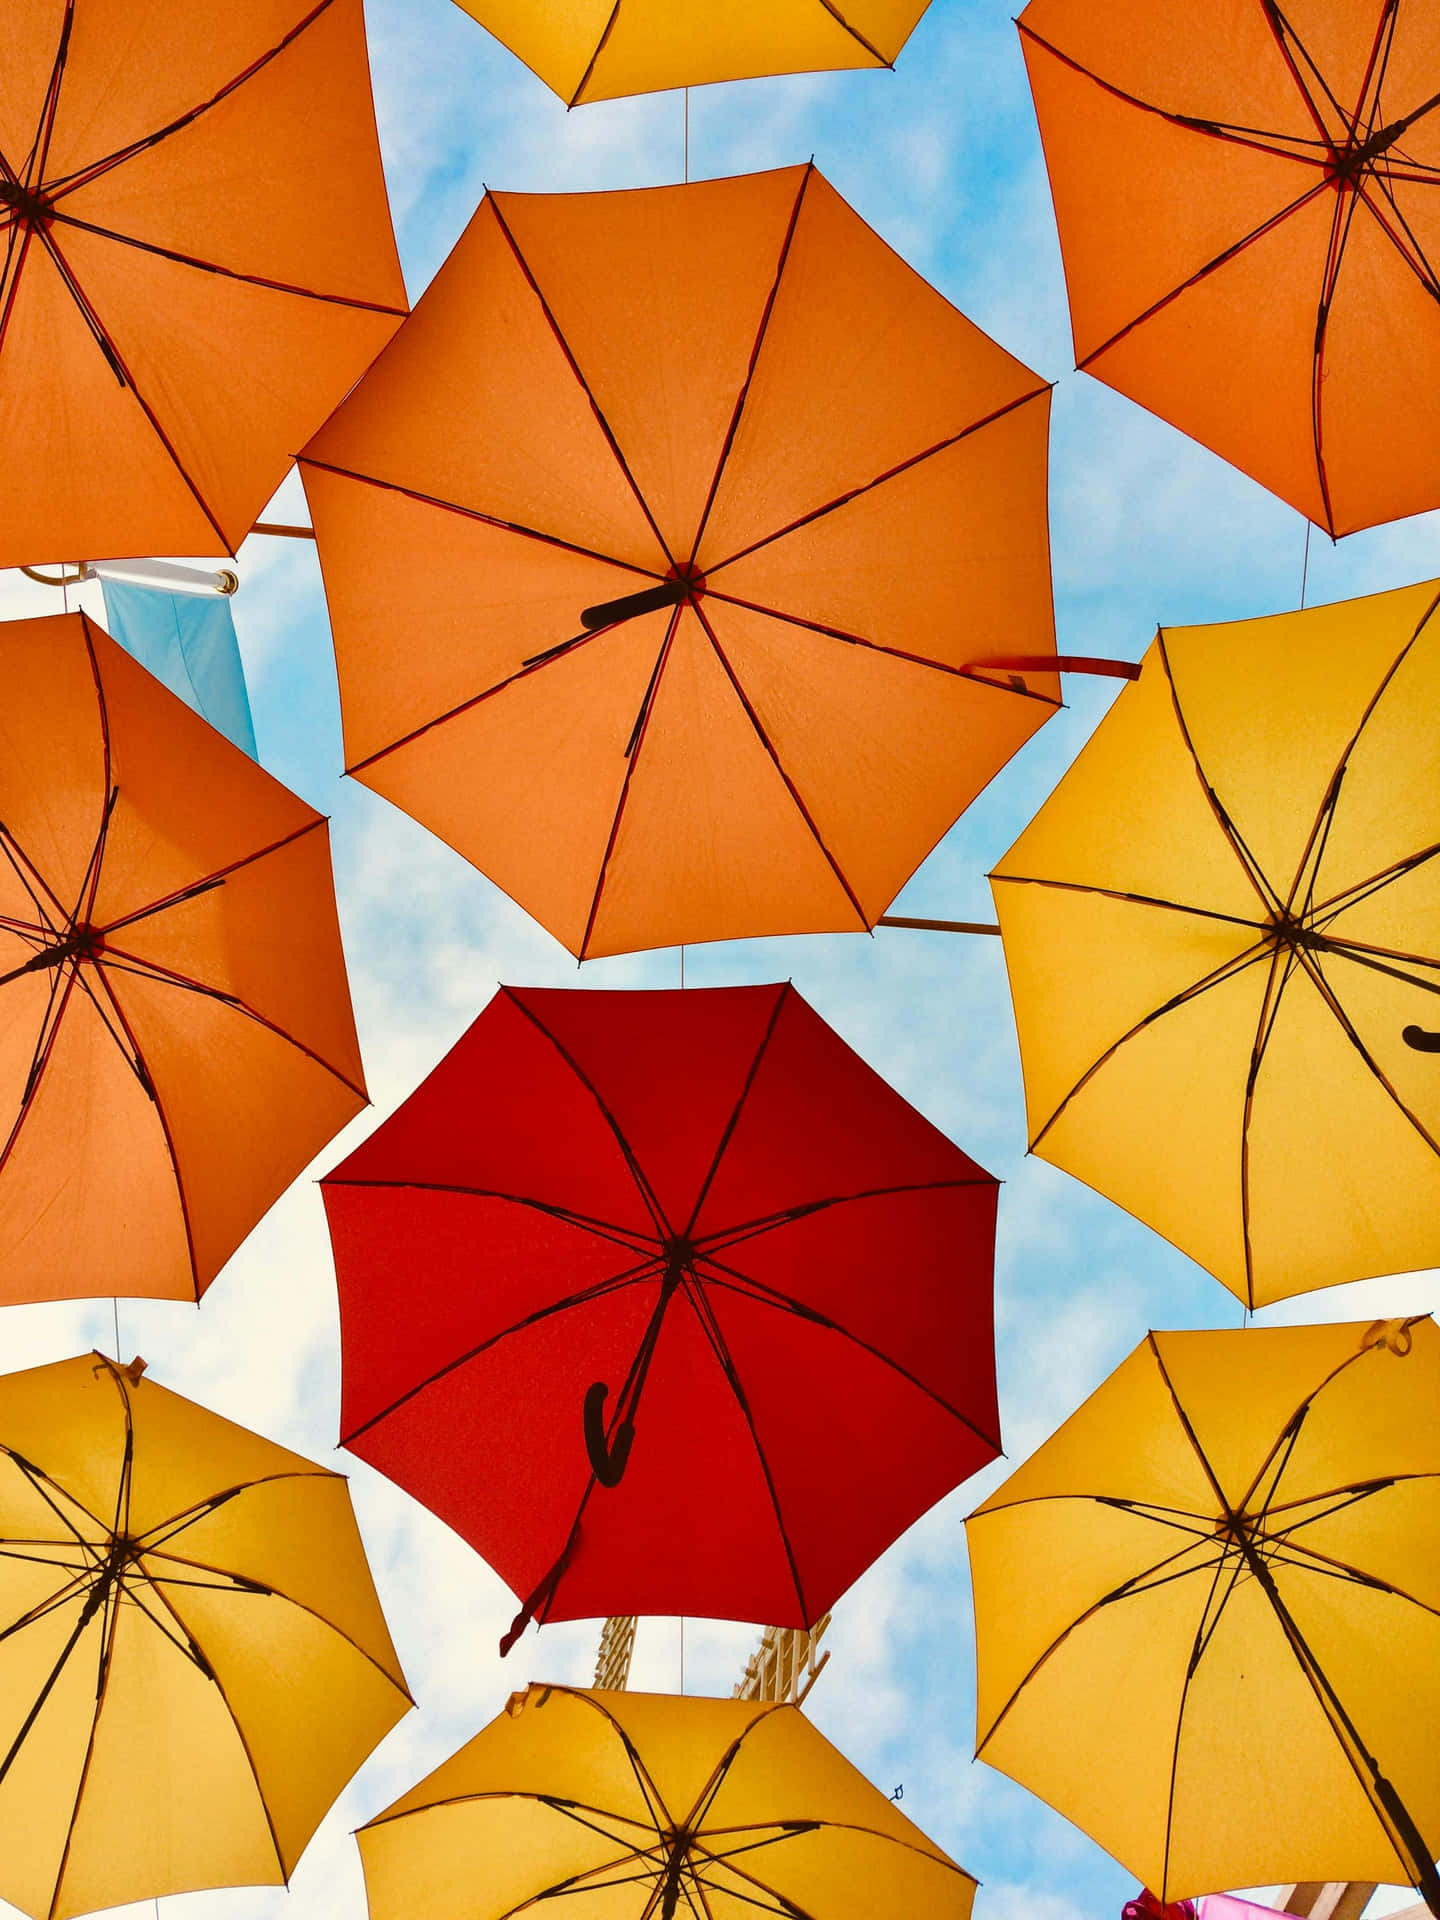 Colorful Umbrellas Sky View Background